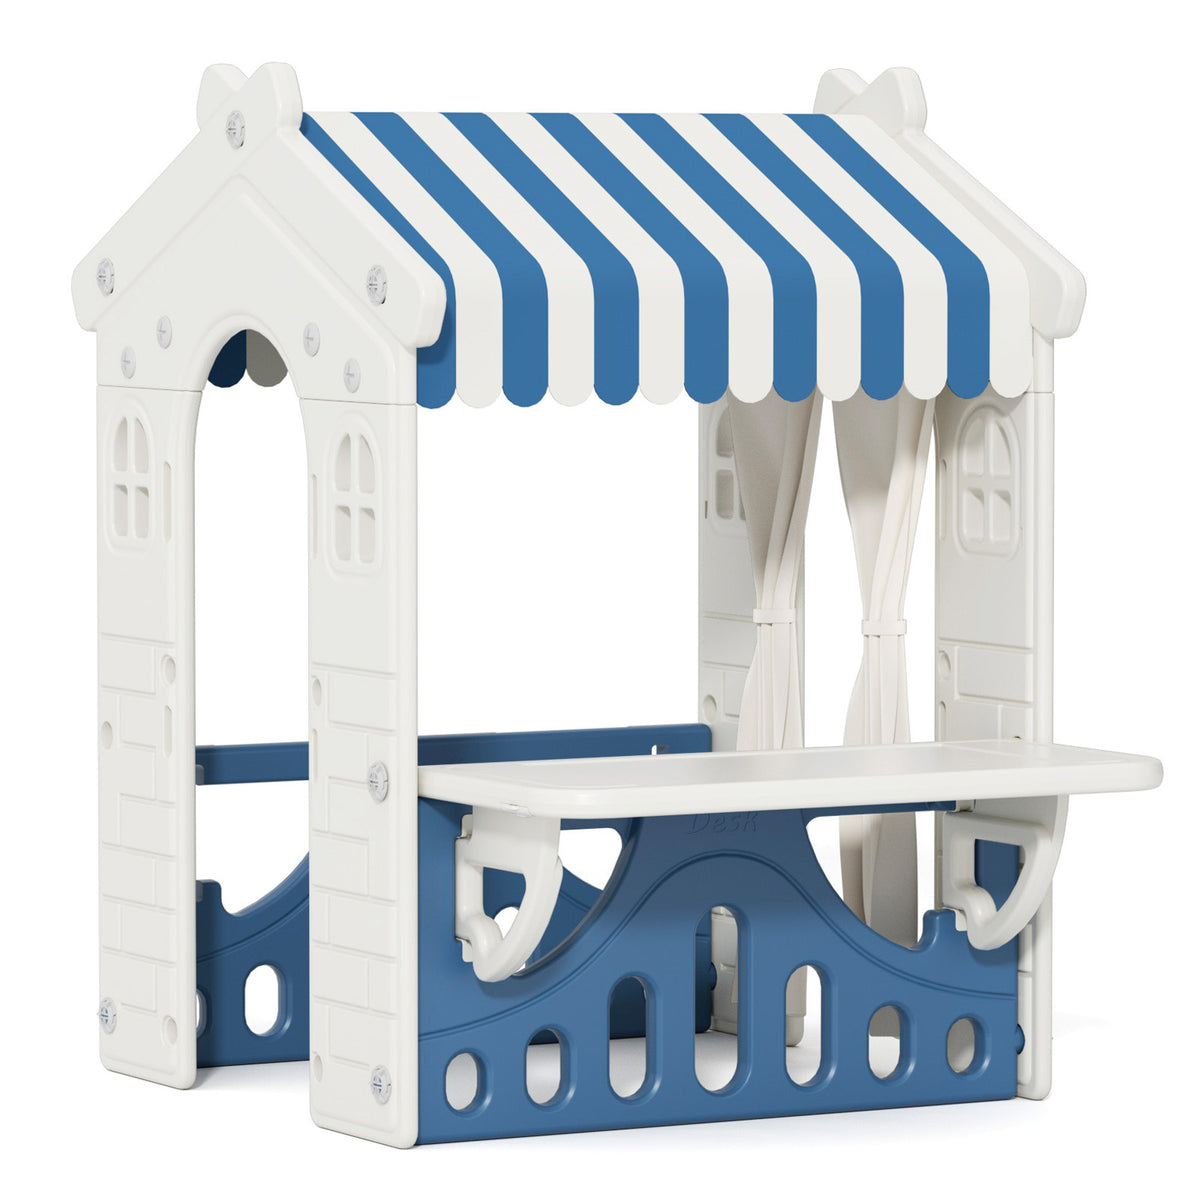 XJD Kids Cottage Playhouse, Toddler Indoor&Outdoor Playhouse, Blue